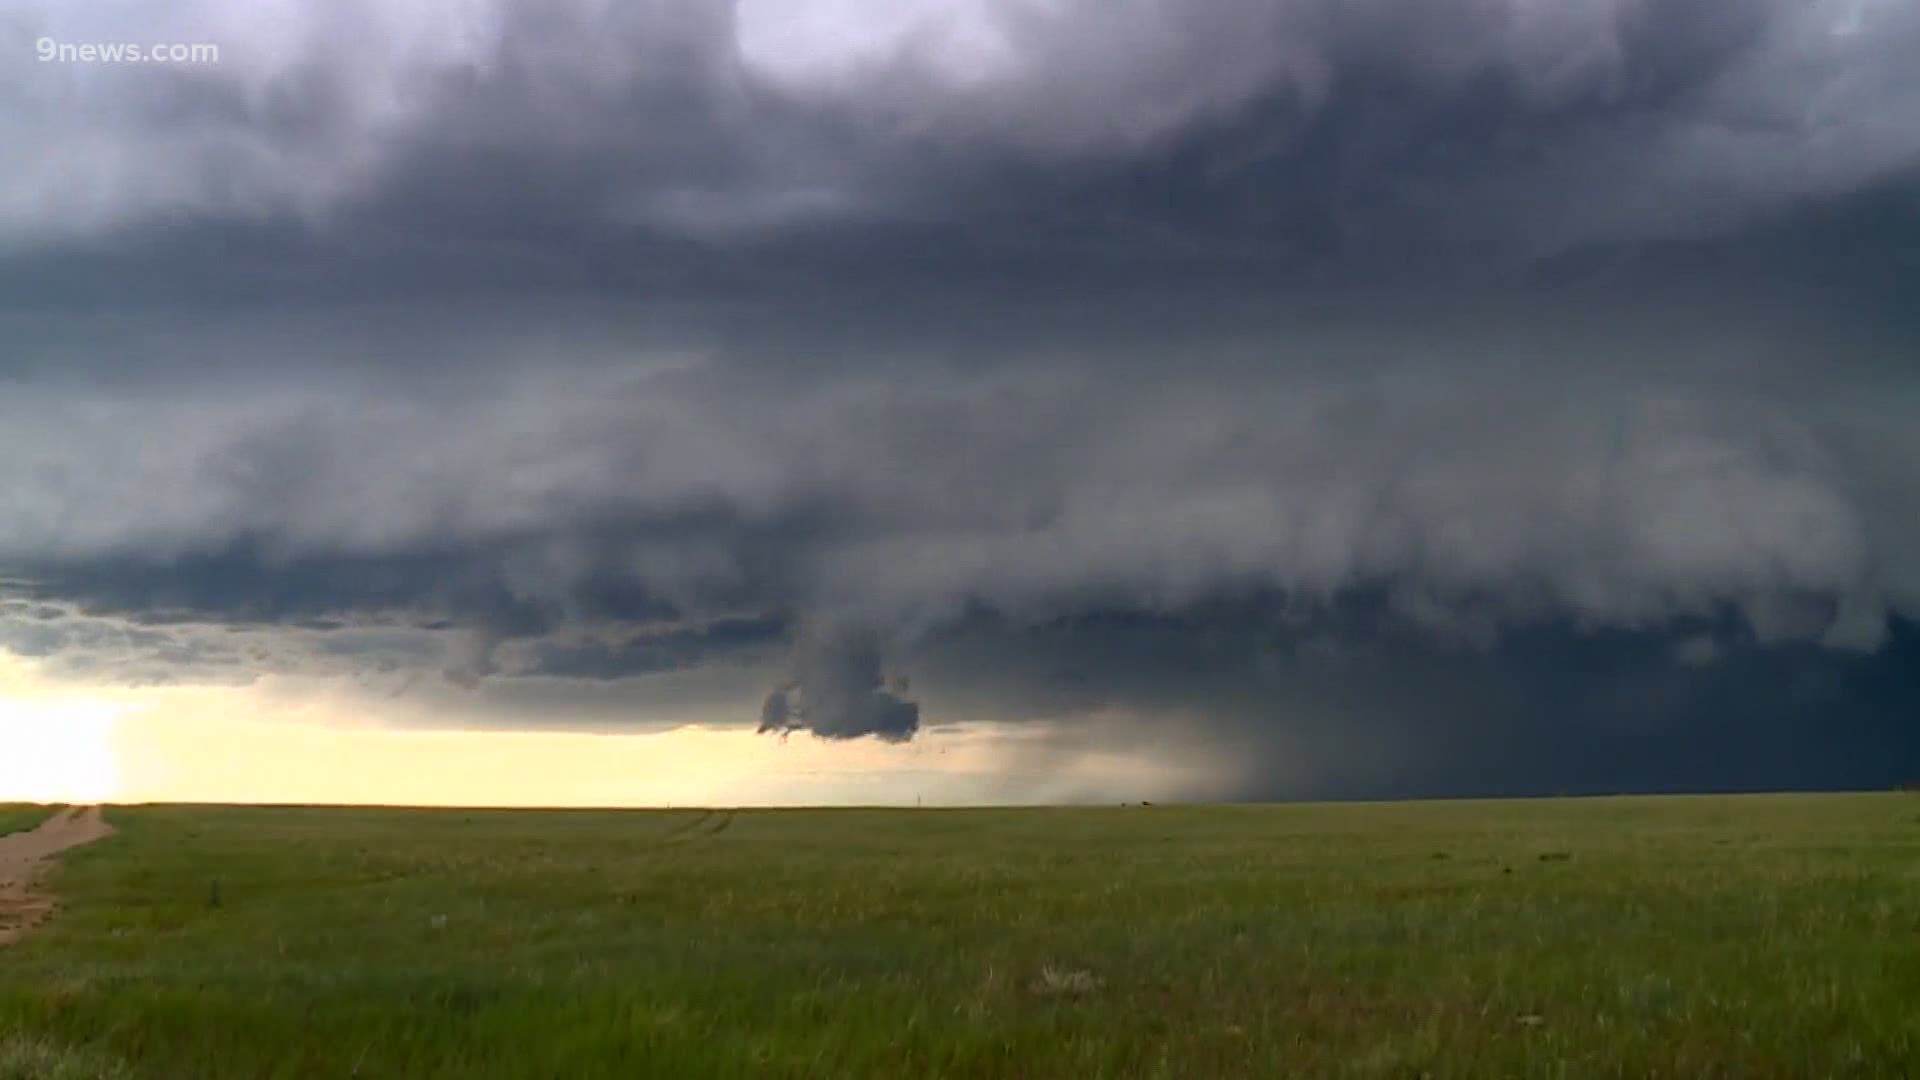 There is a certain level of intensity that those storms must reach to be considered severe. Our Cory Reppenhagen explains.